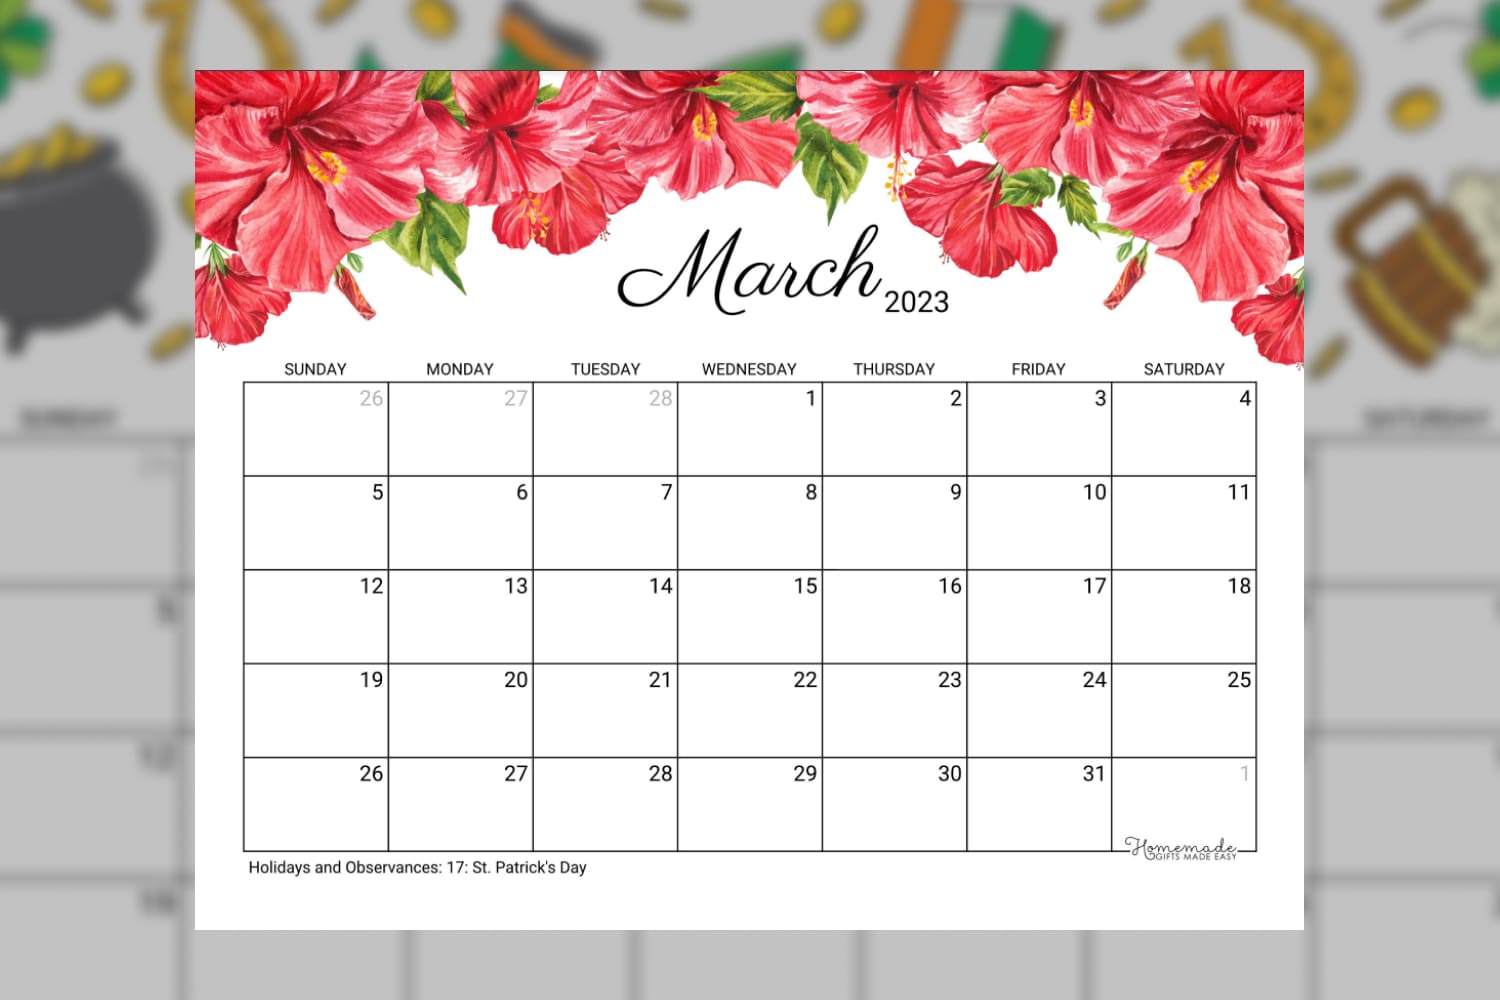 March calendar template in colorful design with illustrations of hibiscus flowers and tropical leaves.